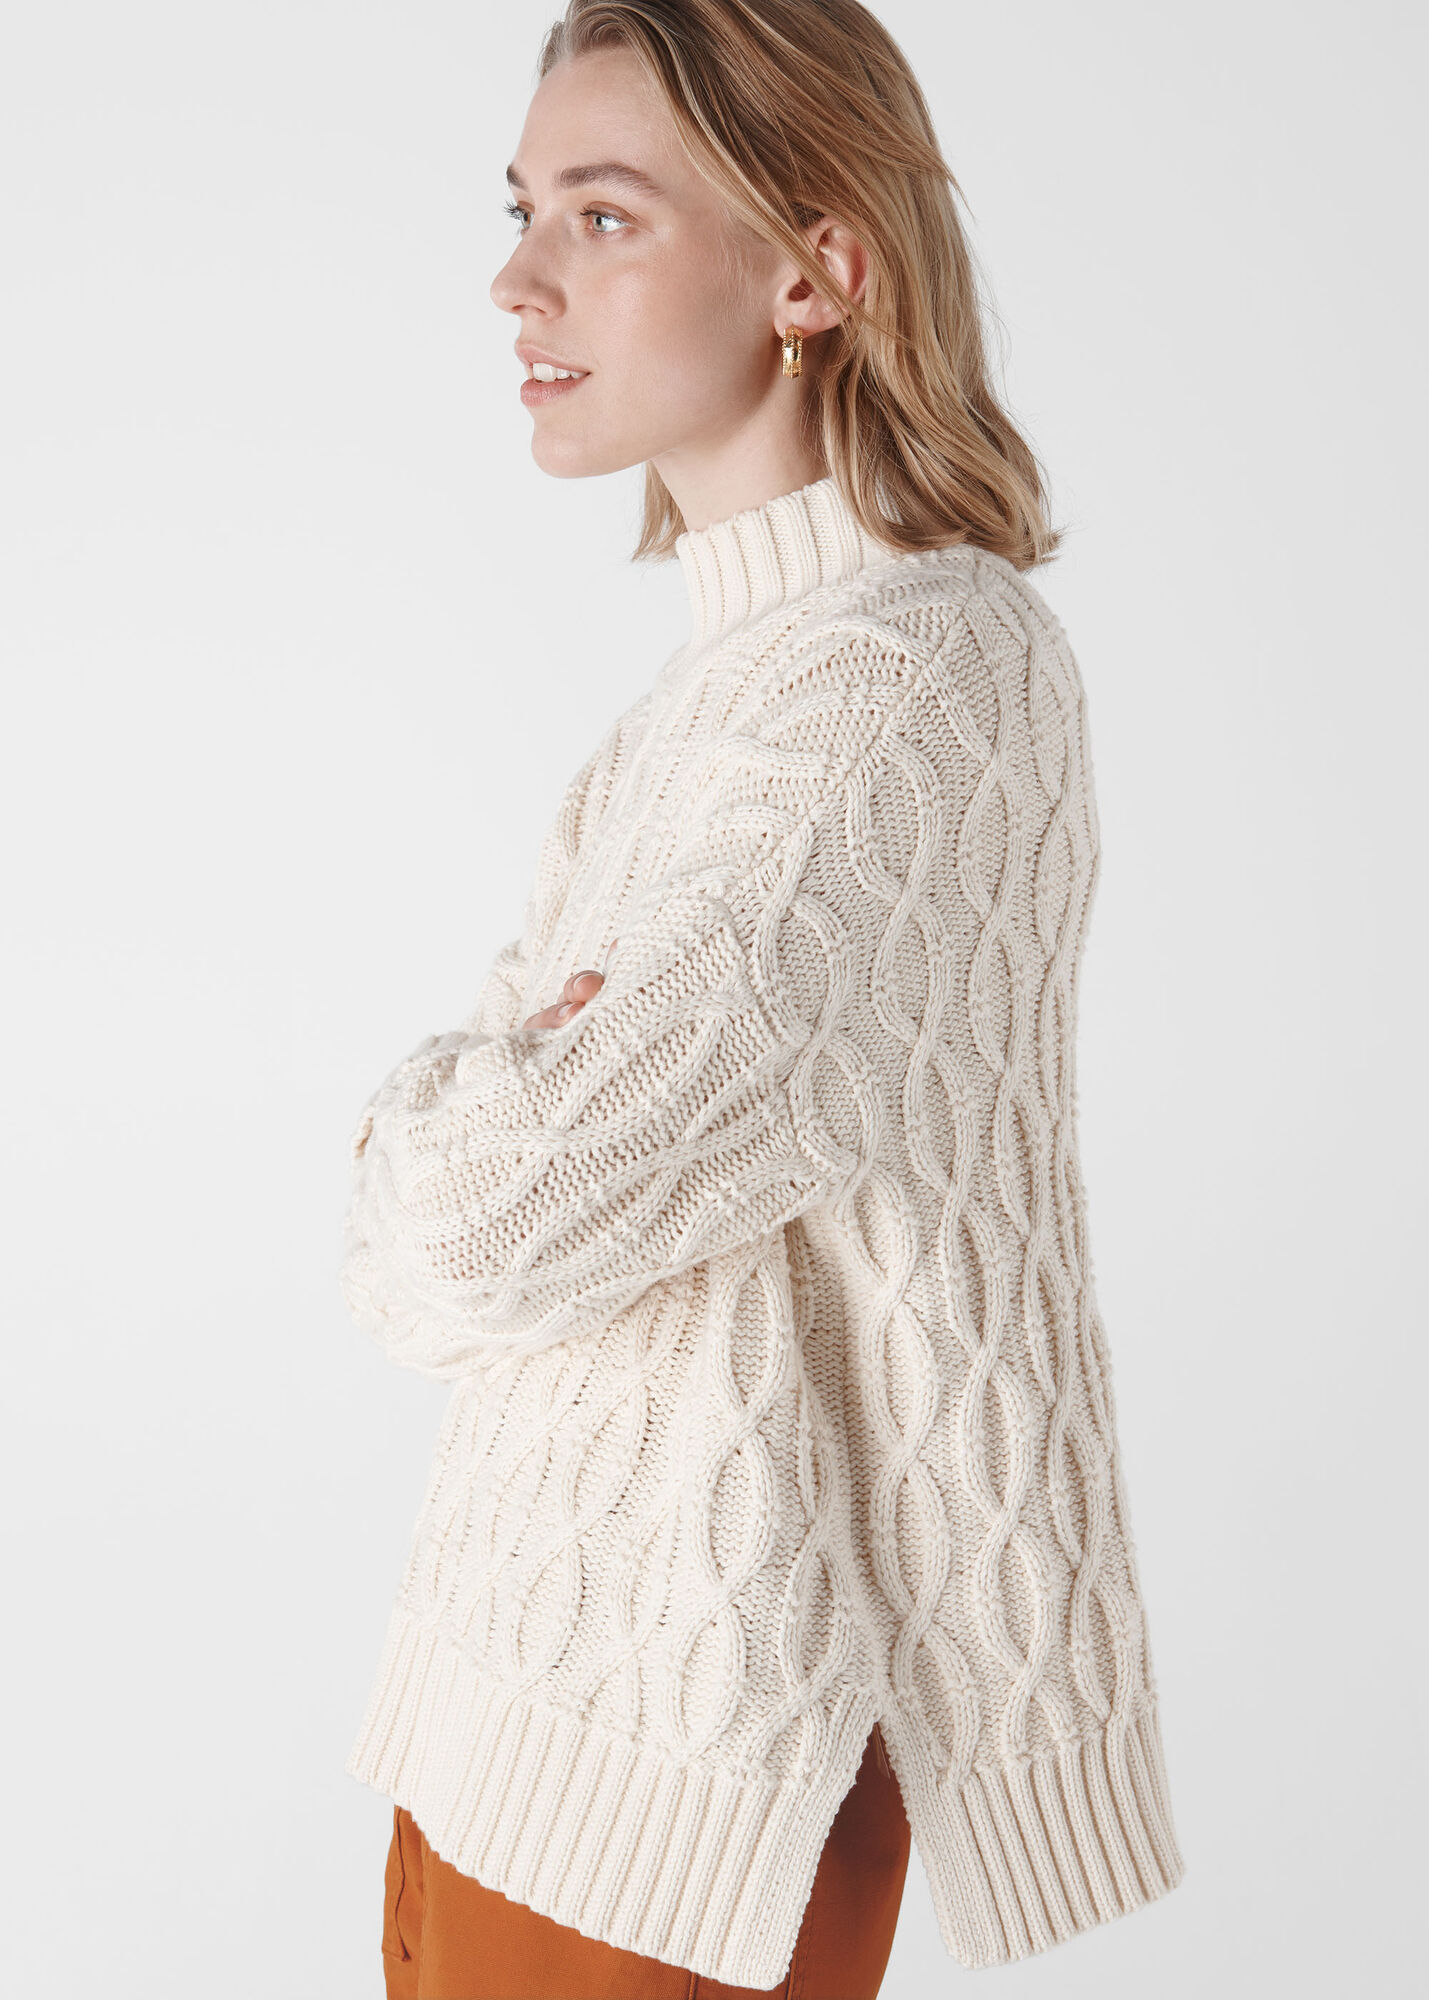 Ivory/Multi Oversized Cable Knit Sweater | WHISTLES